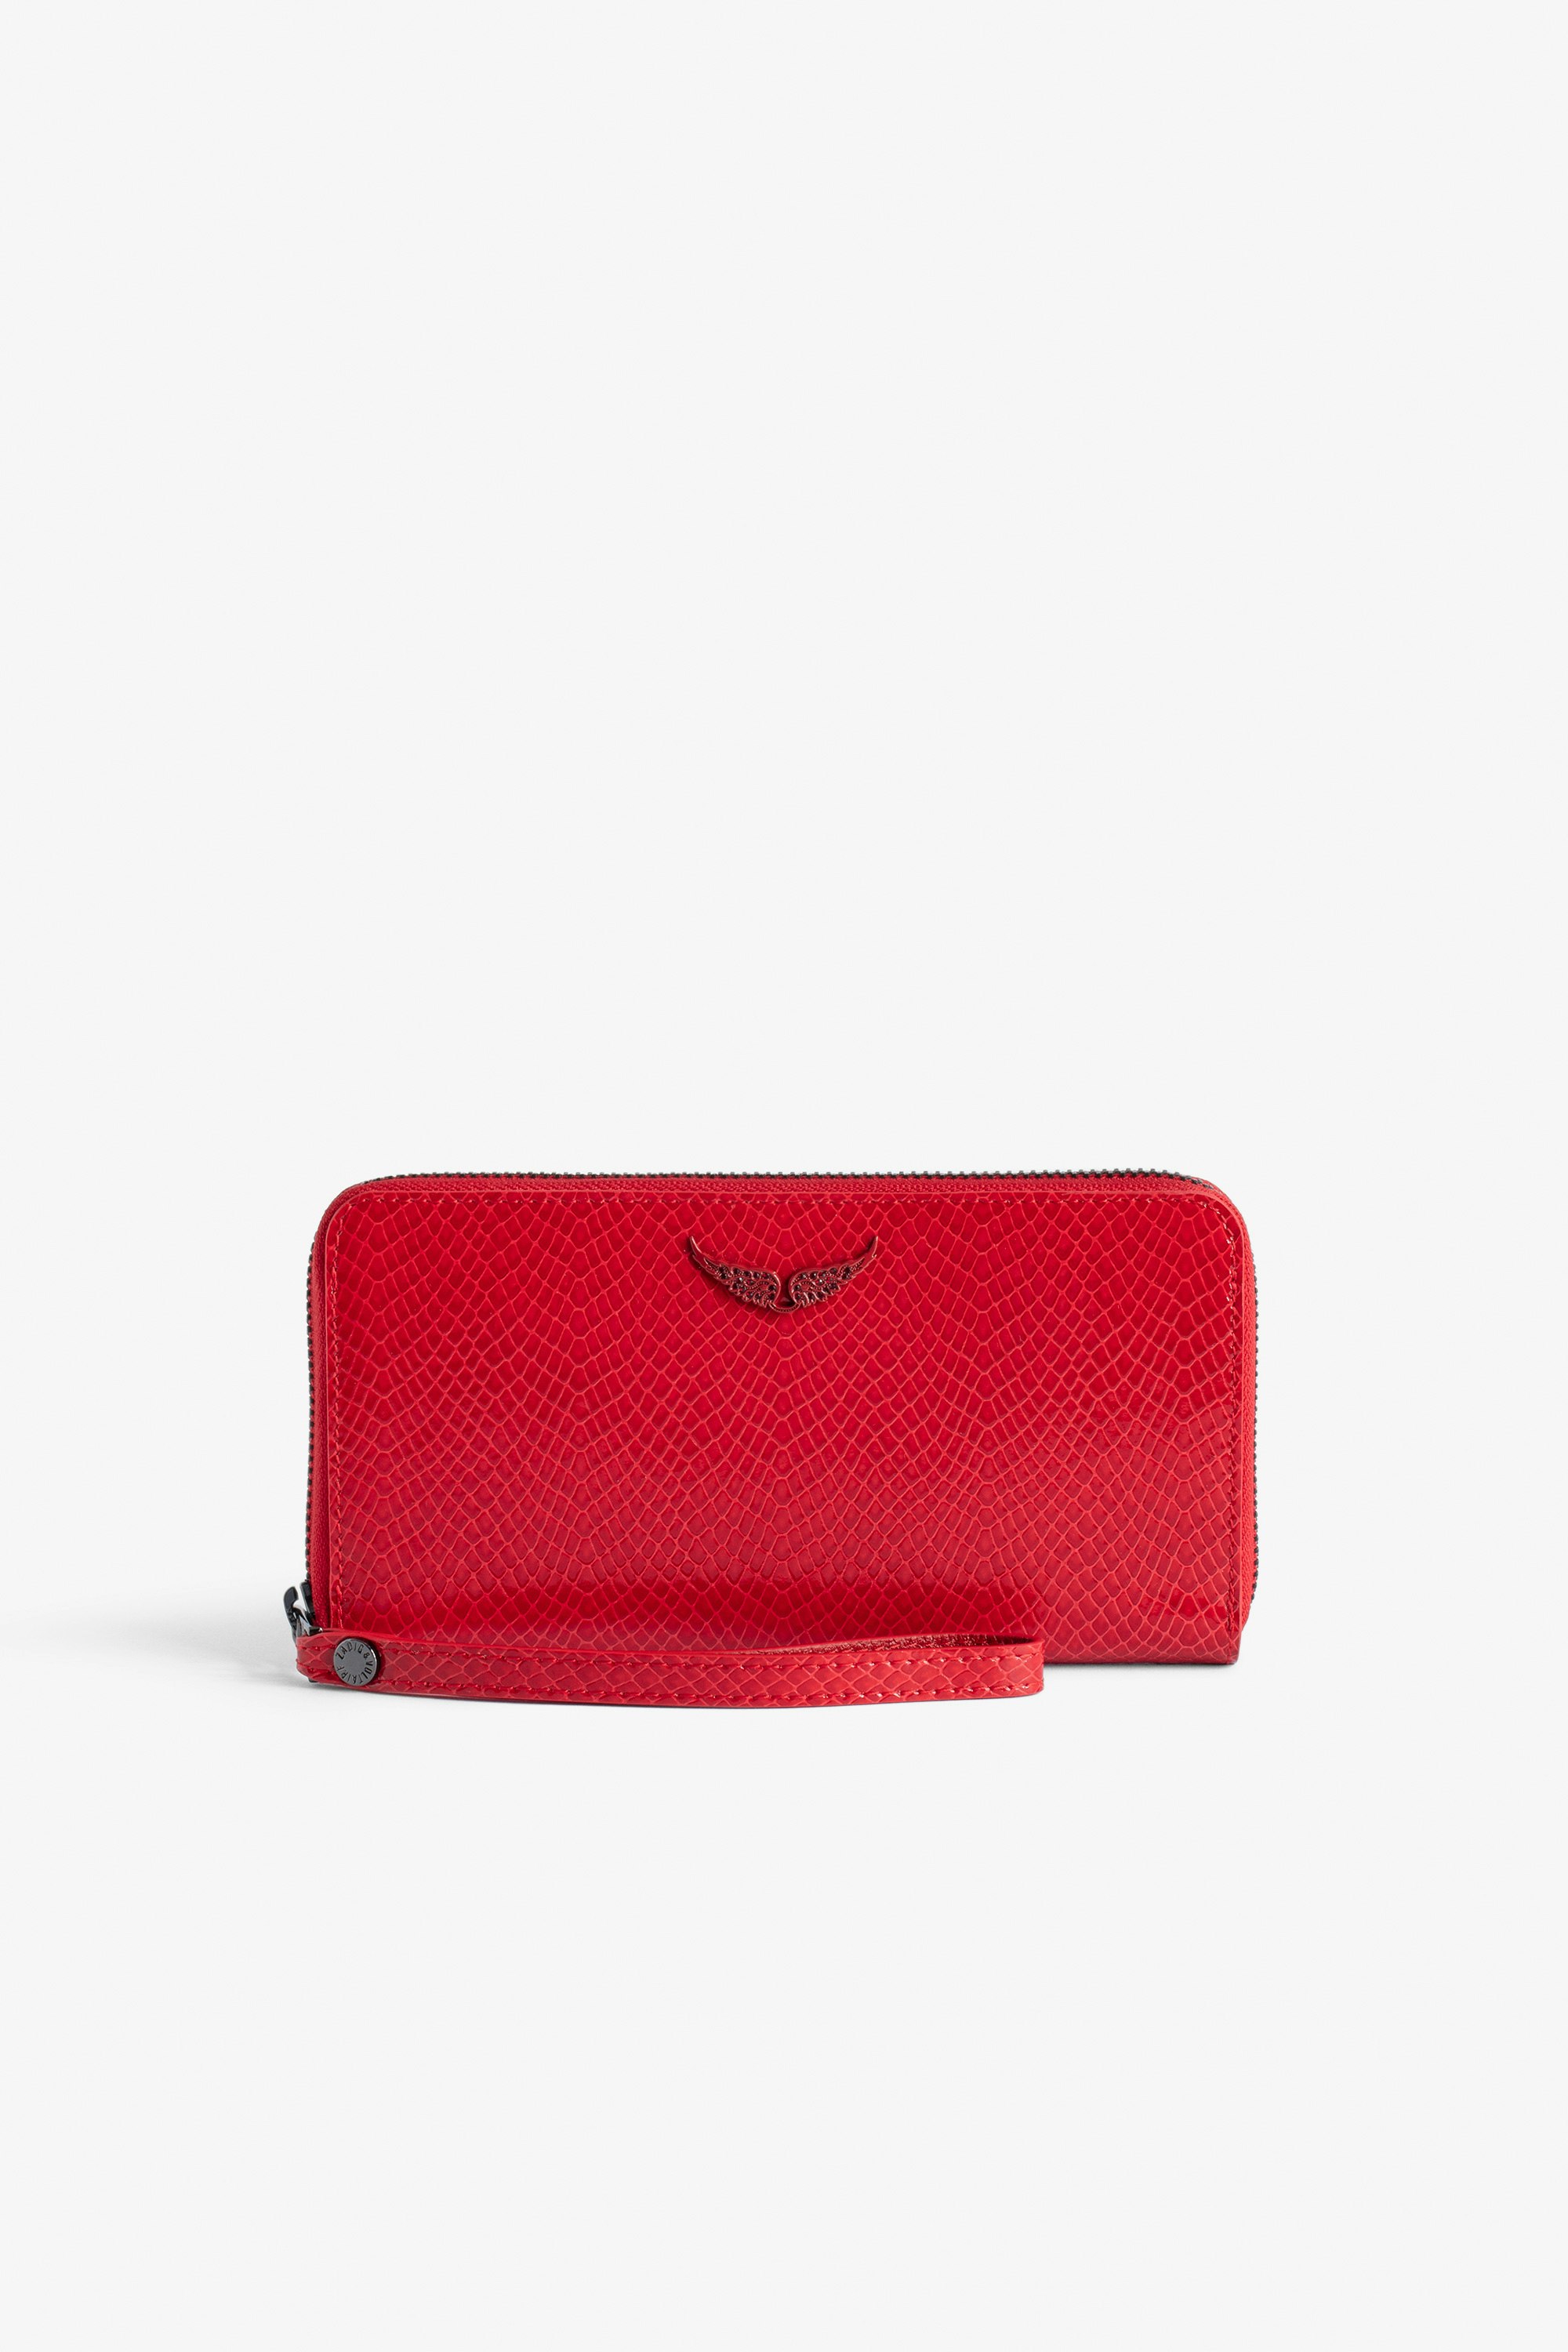 Compagnon Embossed Wallet - Women’s red python-effect patent leather clutch with wings charm.